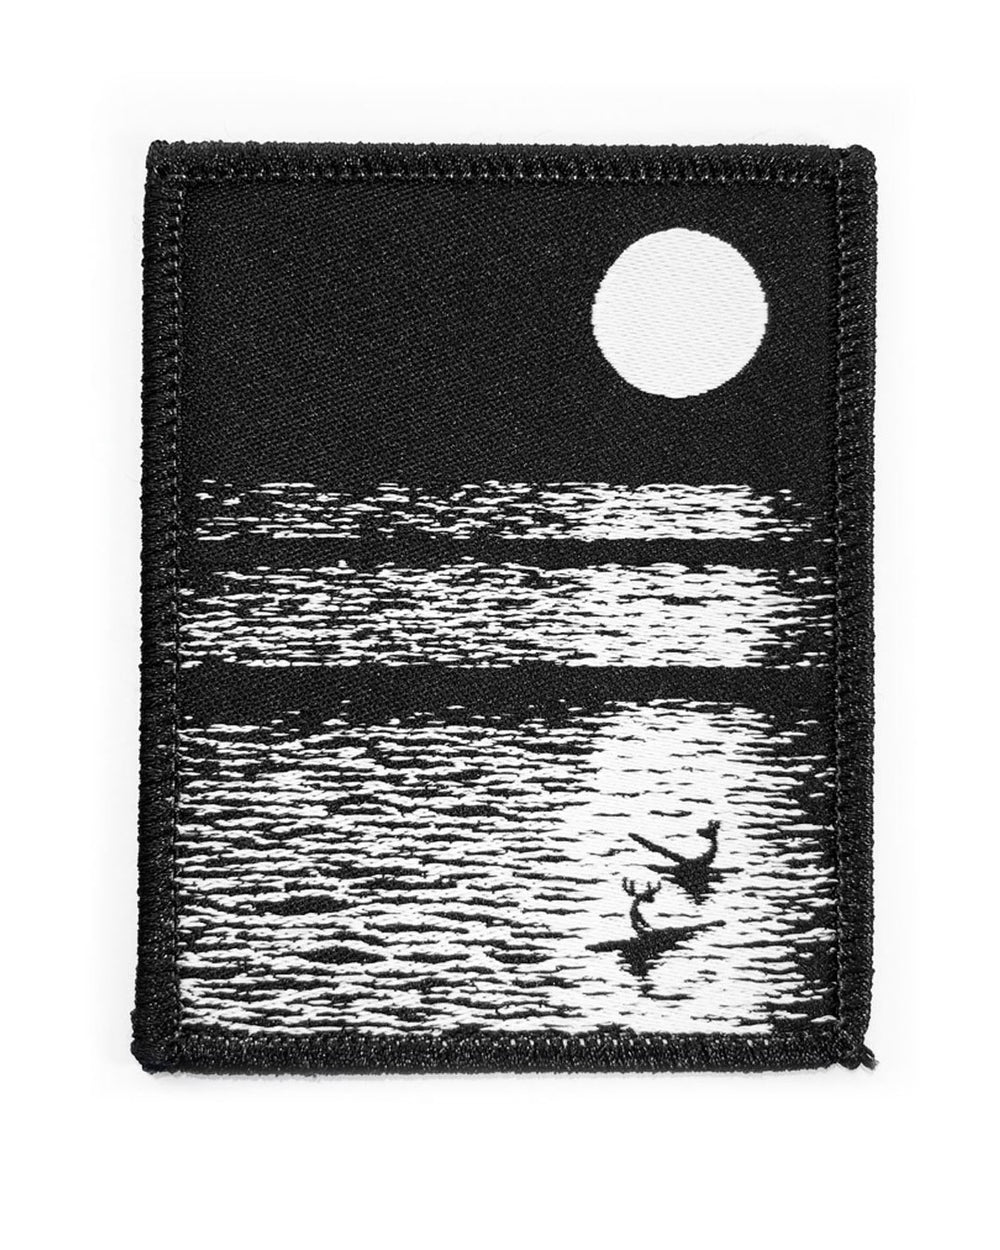 Moonlight Embroidered Patch